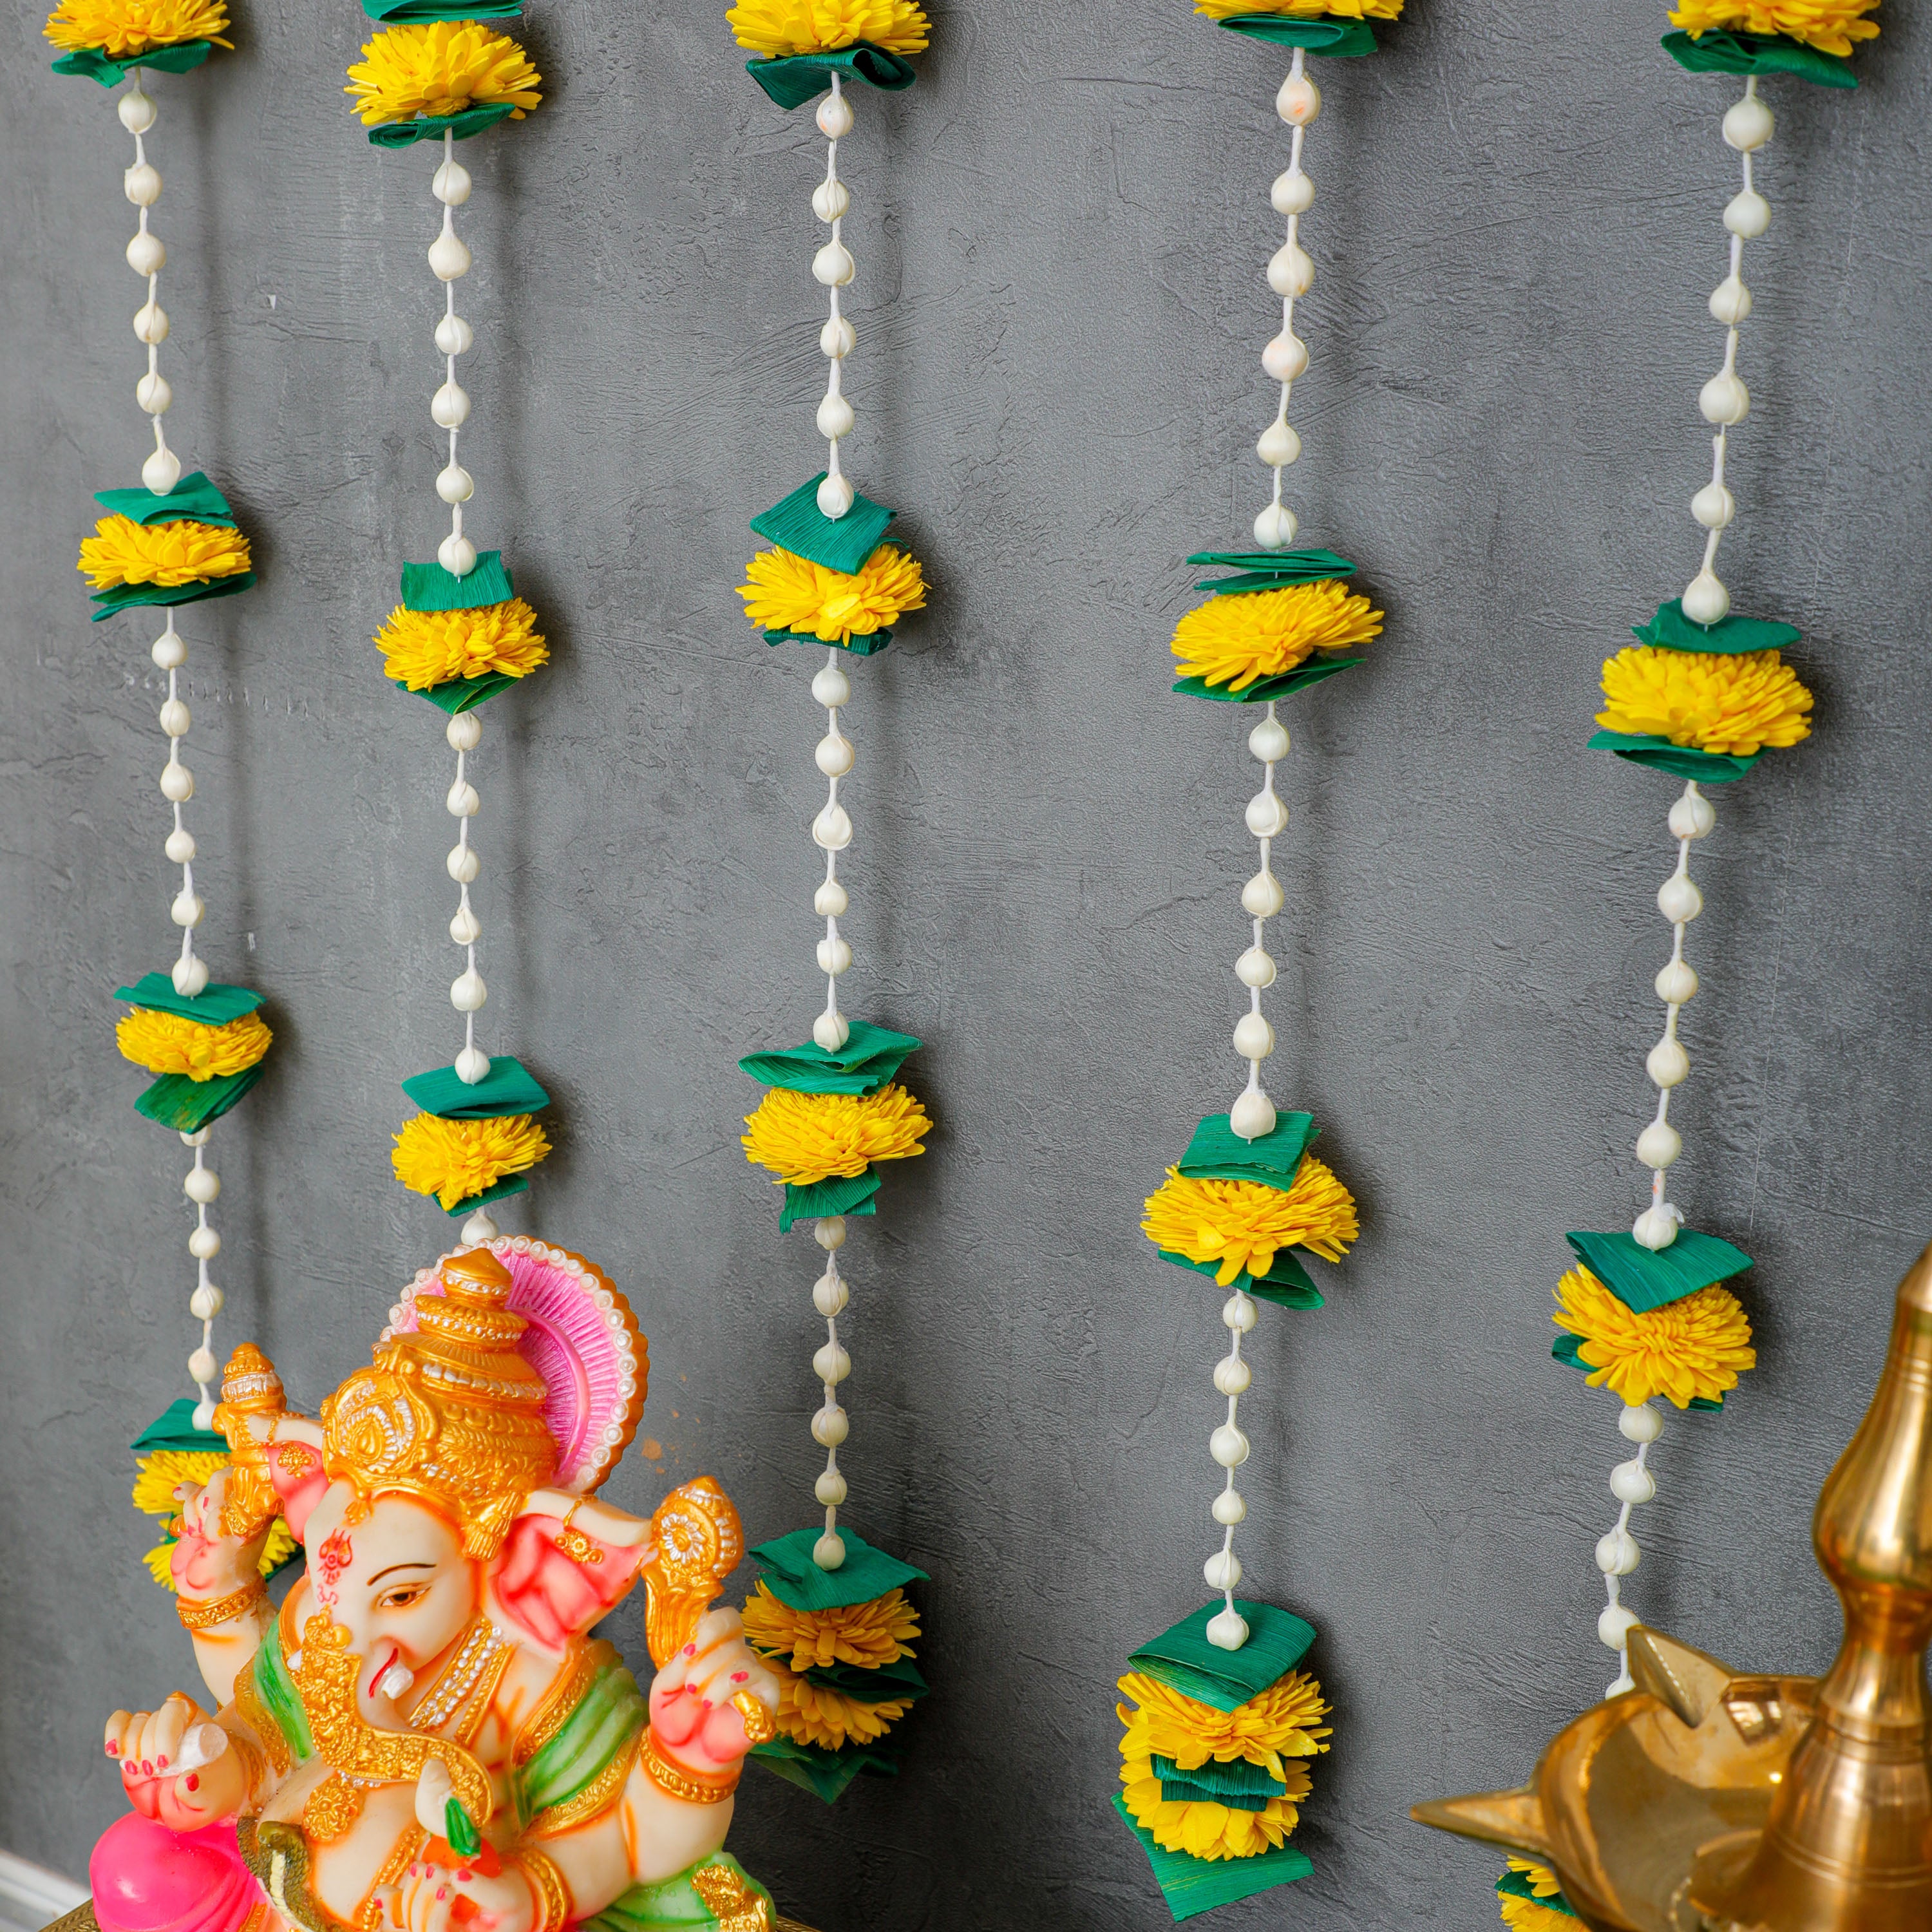 Make a sustainable choice with this stunning  marigold garland